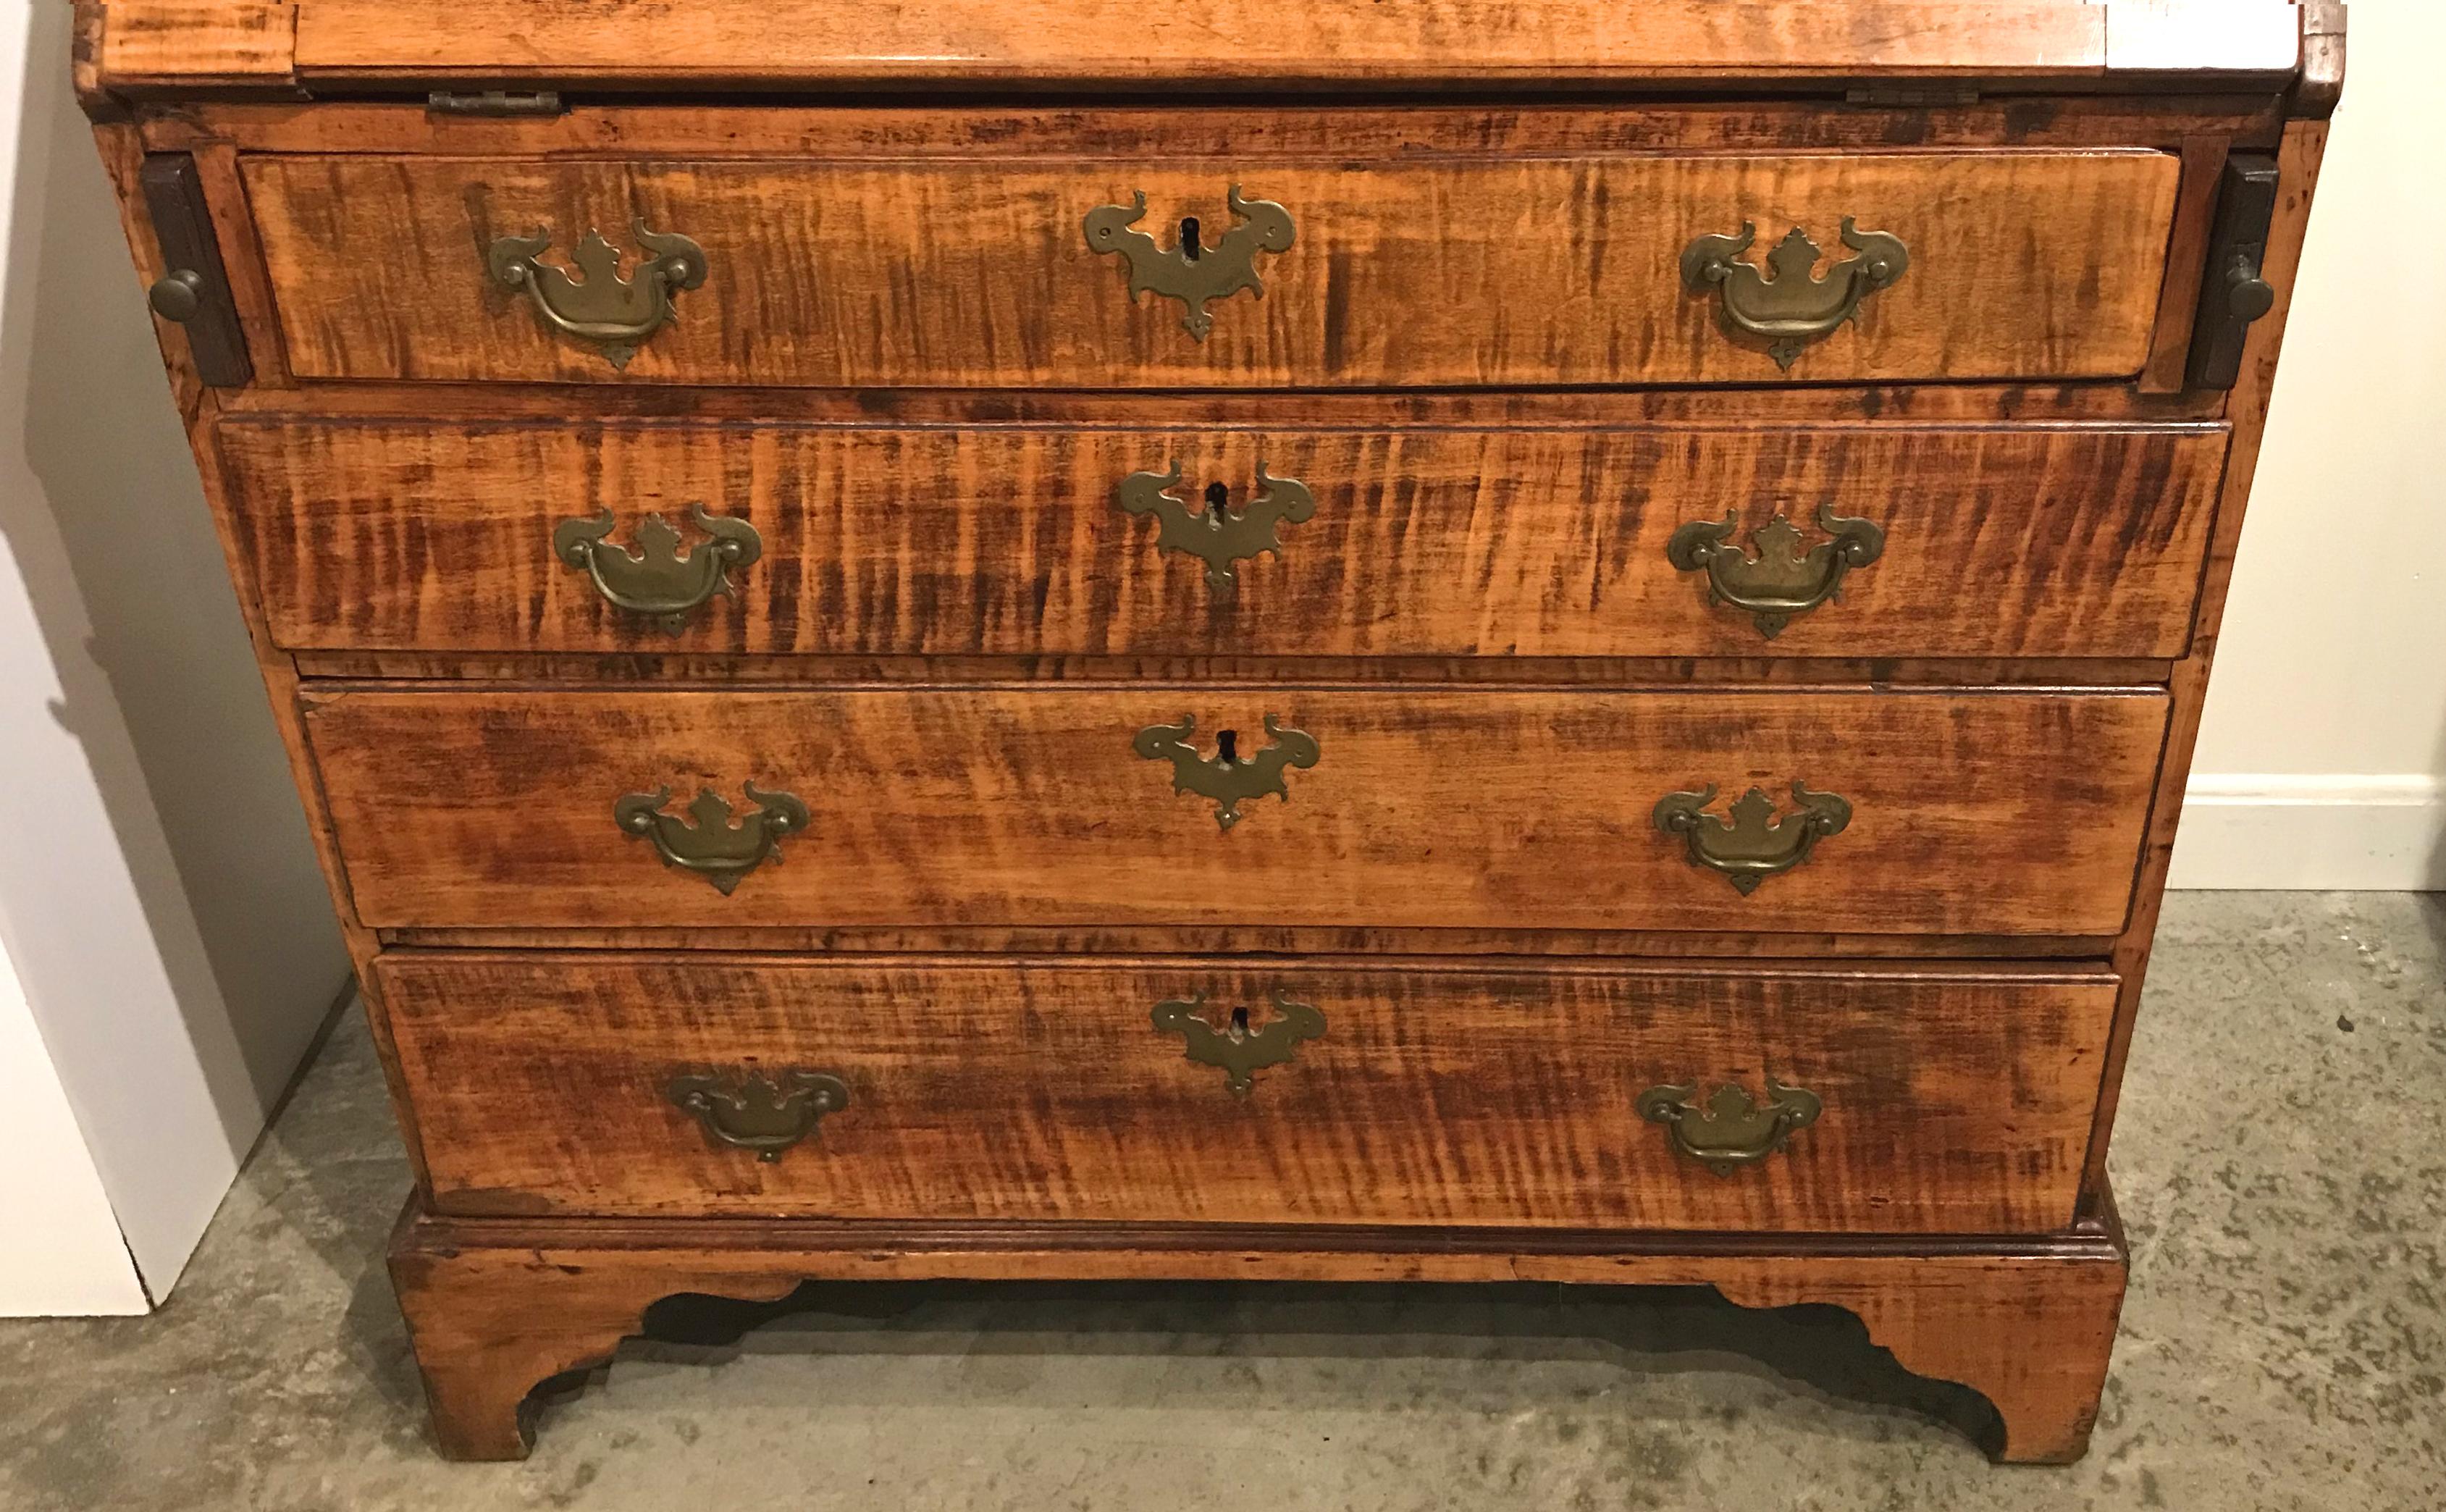 A fine example of a New England tiger maple slant front desk circa 1760 with compartmentalized interior featuring eight valanced open cubbies flanking a central prospect drawer over seven fitted drawers. The lower half of the desk features four